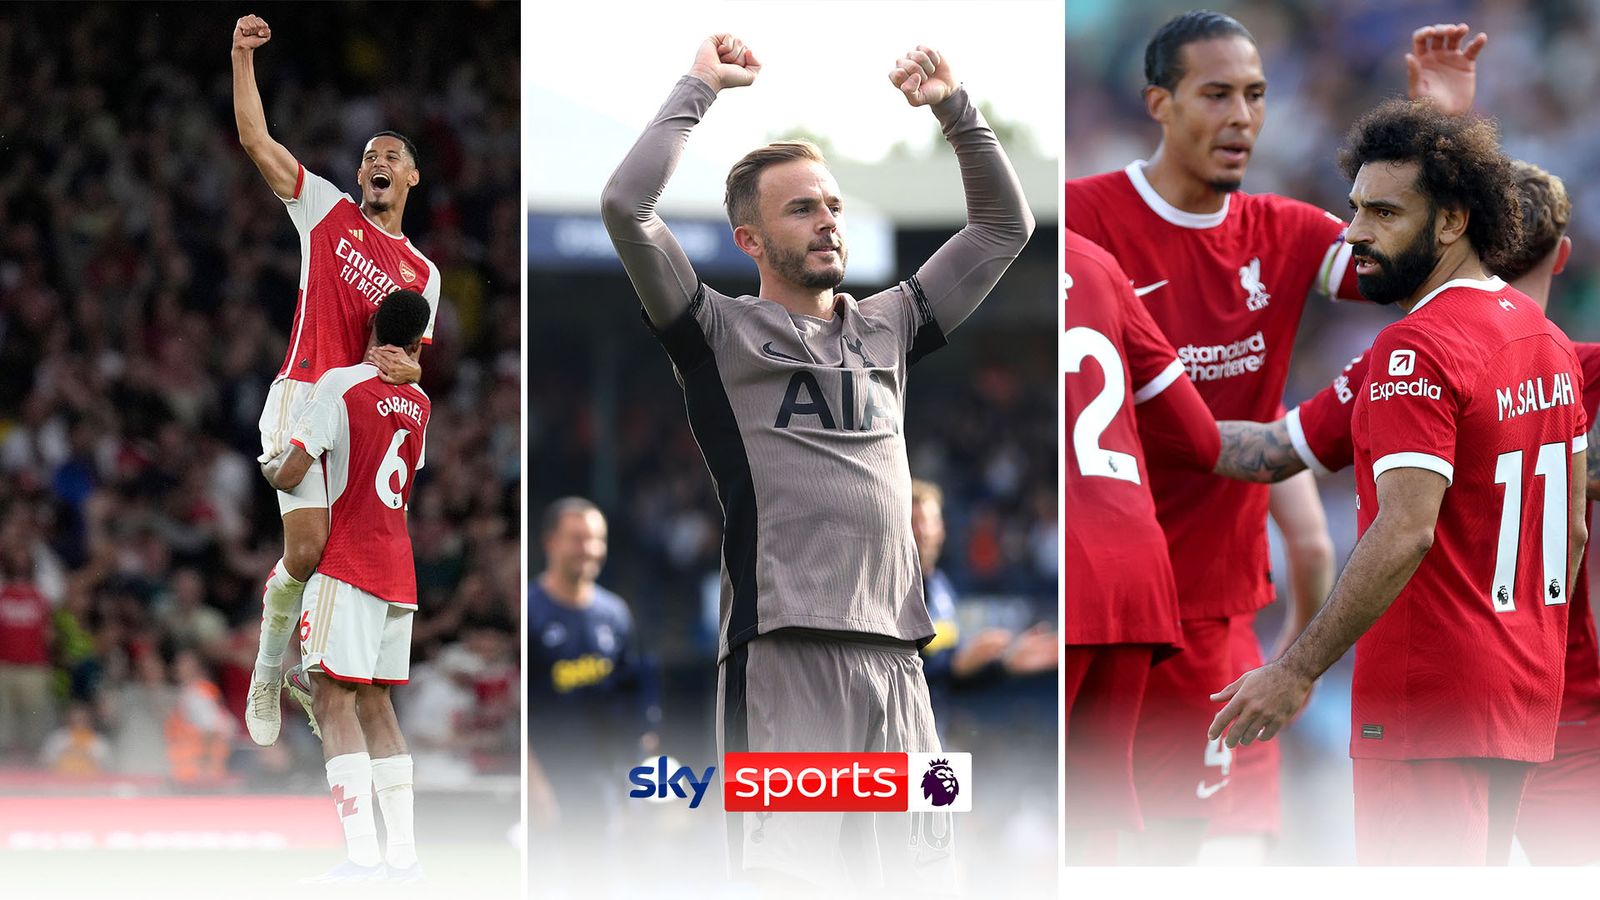 Gary Neville outlines whether Arsenal, Tottenham and Liverpool can challenge Manchester City for the Premier League title this season.